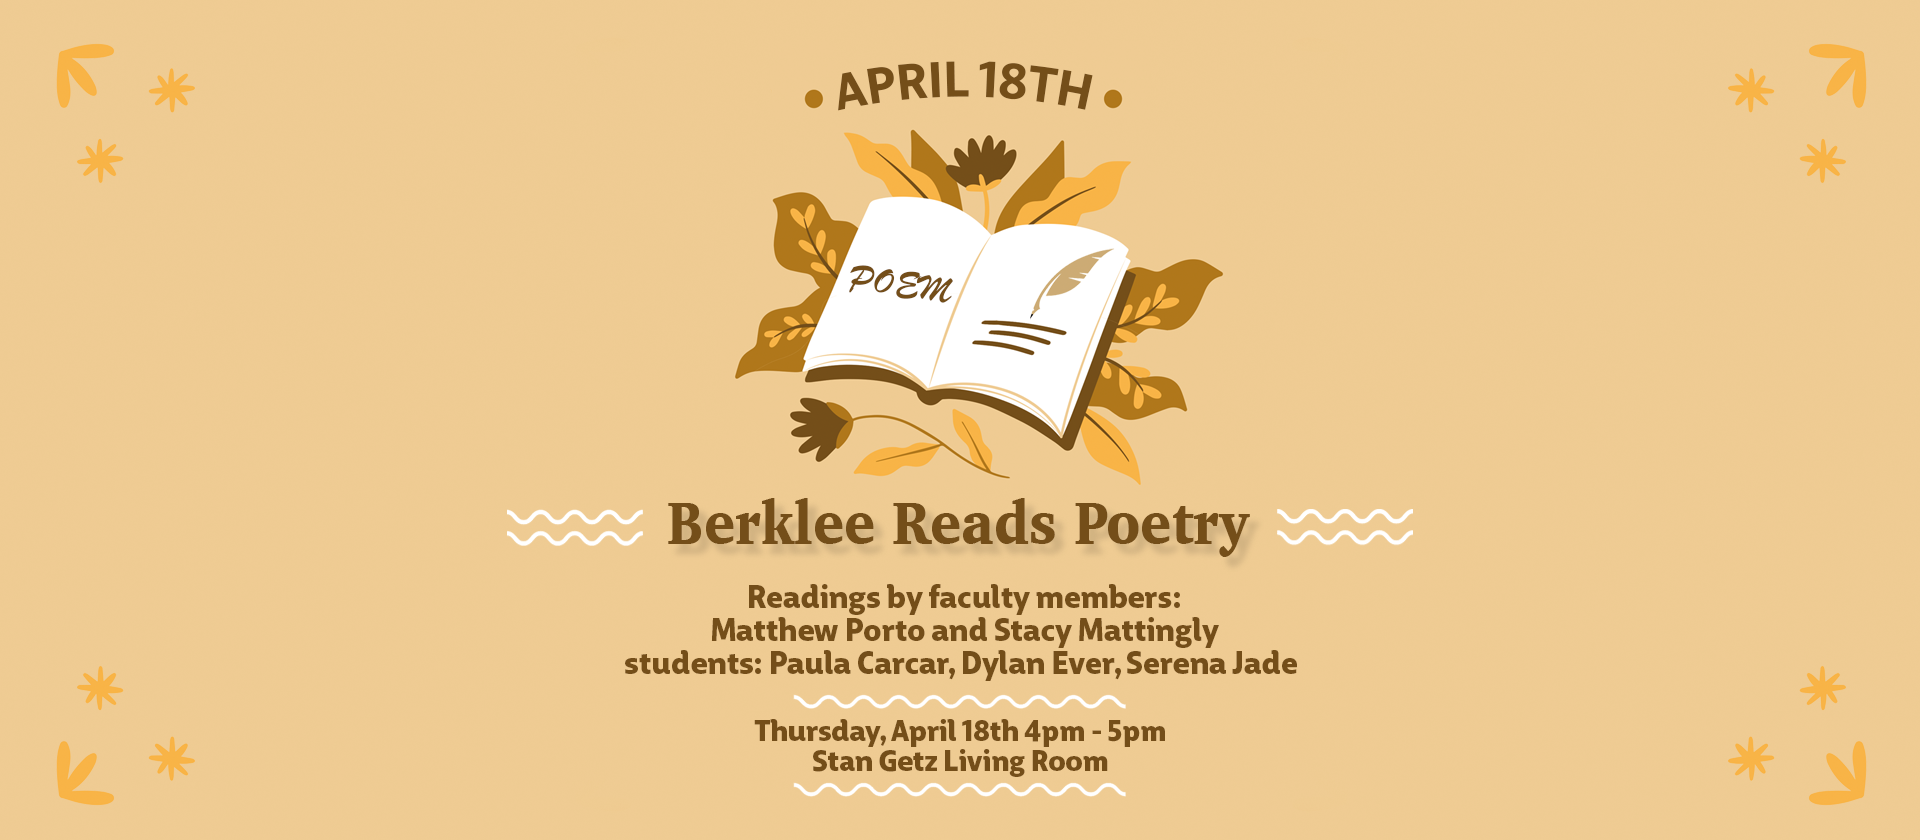 Berklee Reads Poetry! Join us on April 18th for a poetry reading at 4pm in the Stan Getz Library Living Room